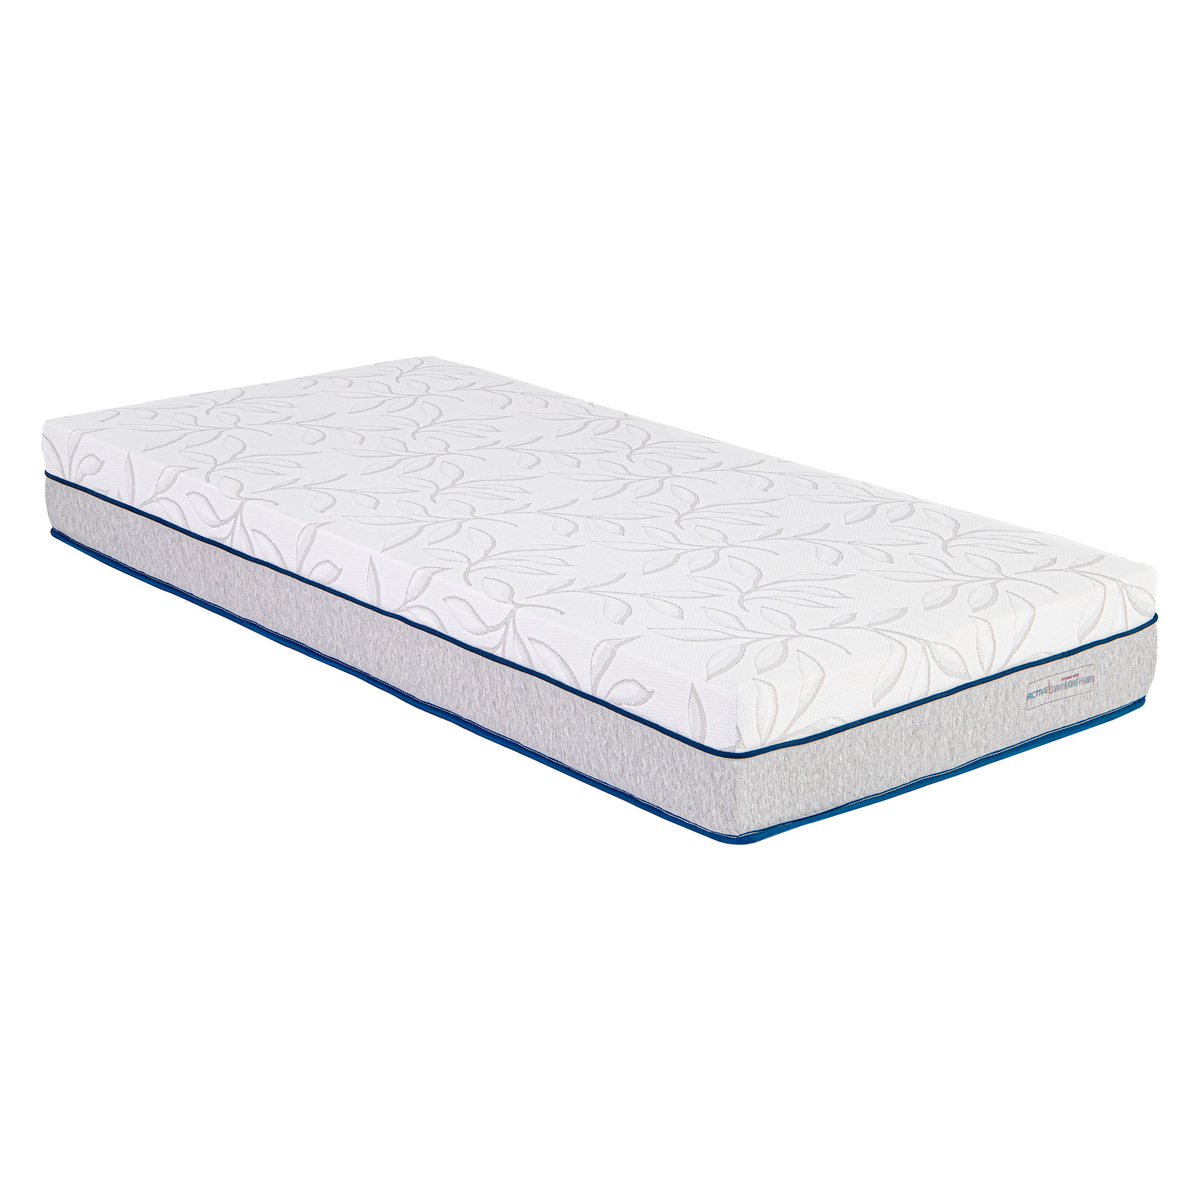 Royal Cozee Medical Gel Infused Mattress 190x90+20cm